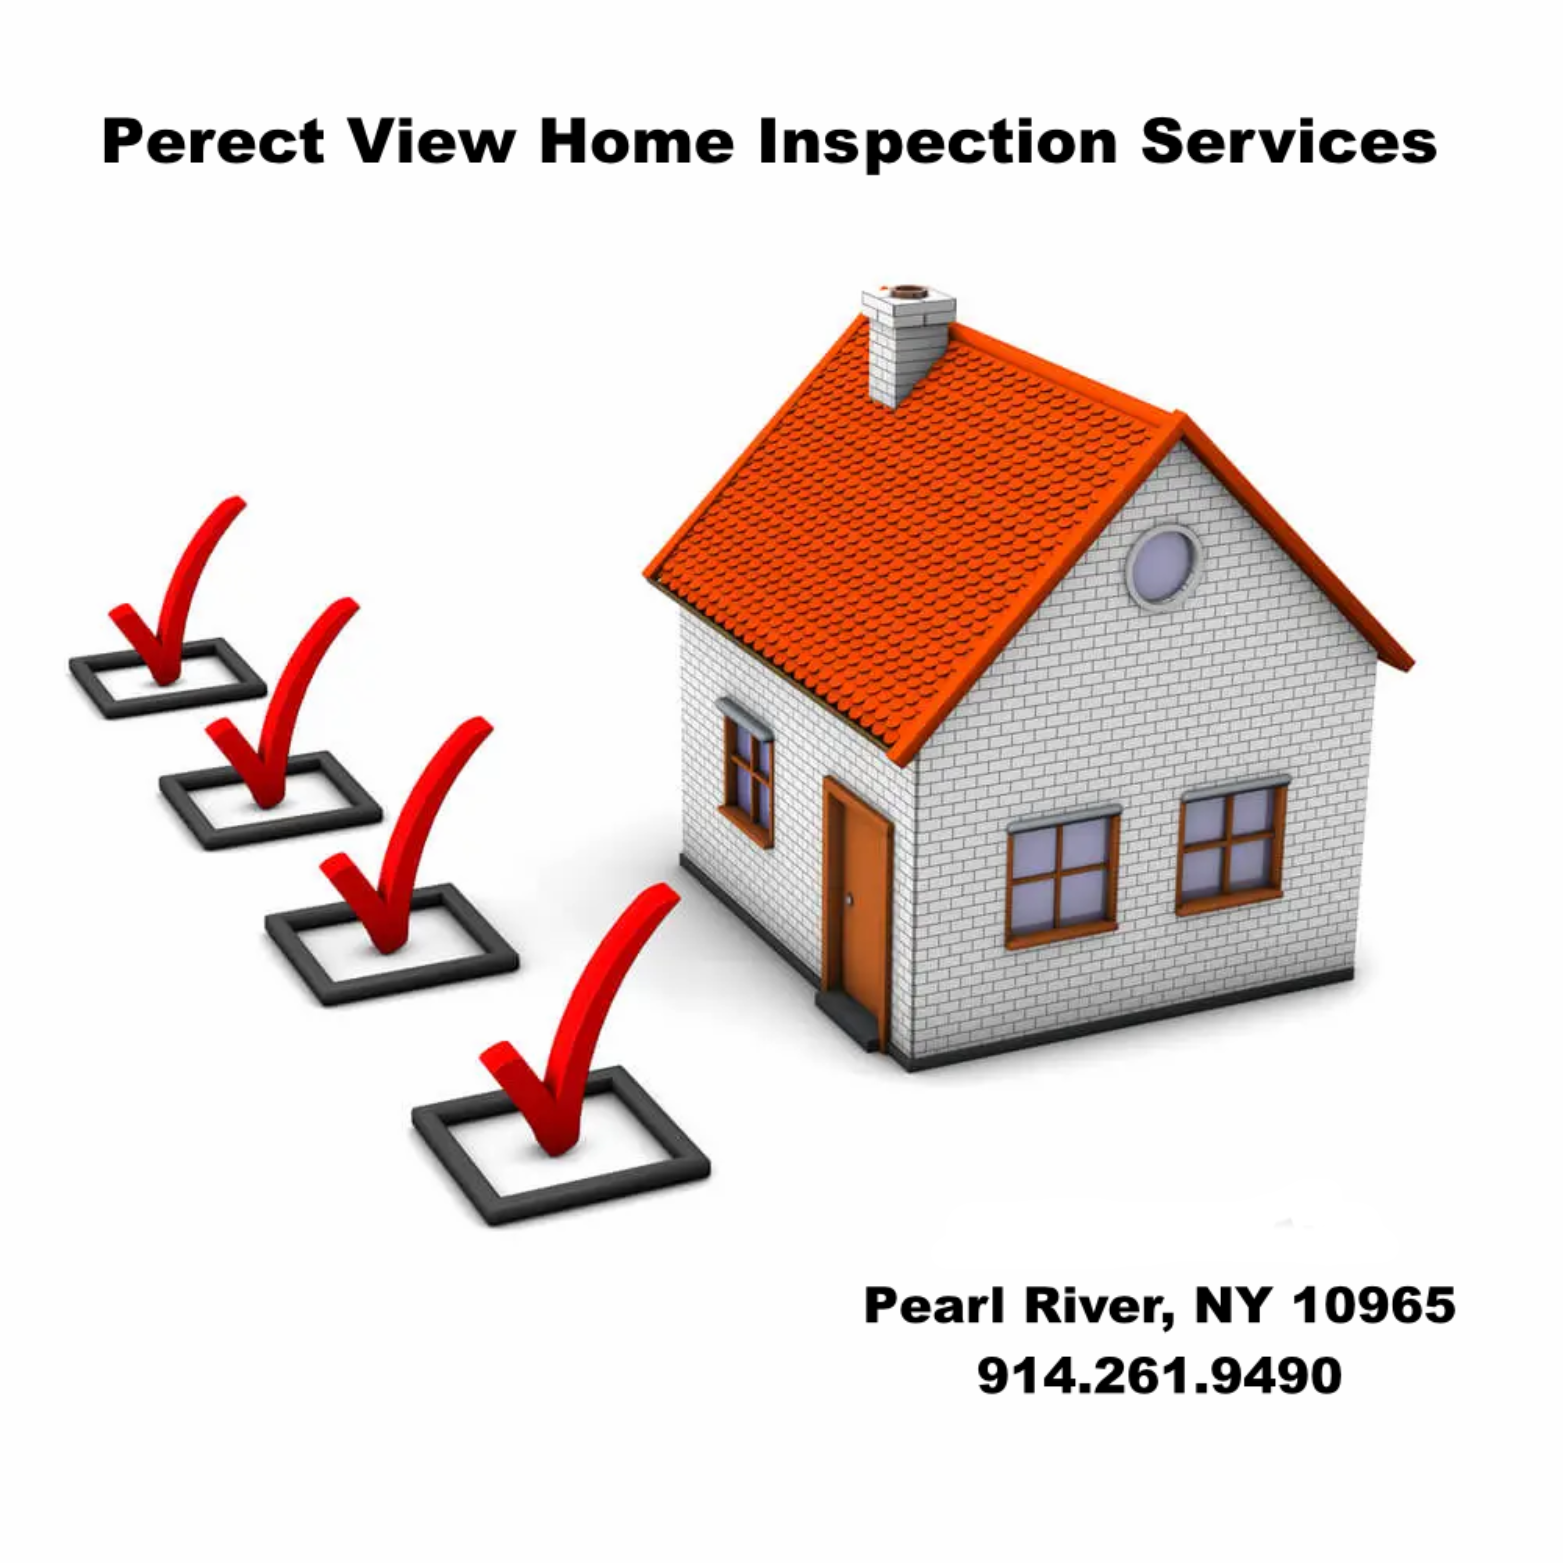 Perfect View Home Inspection Services